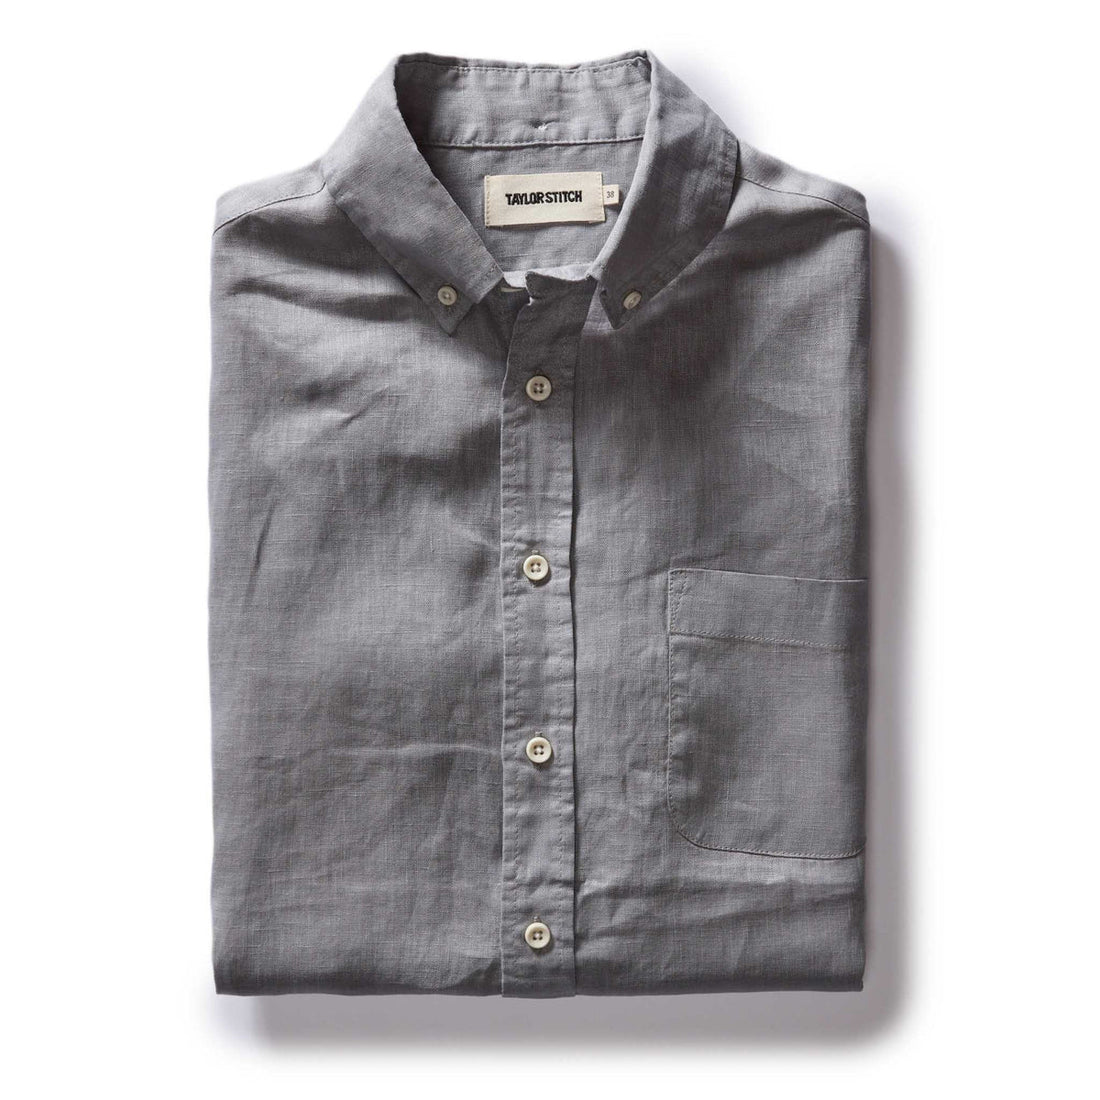 Taylor Stitch - The Jack in Overcast Linen